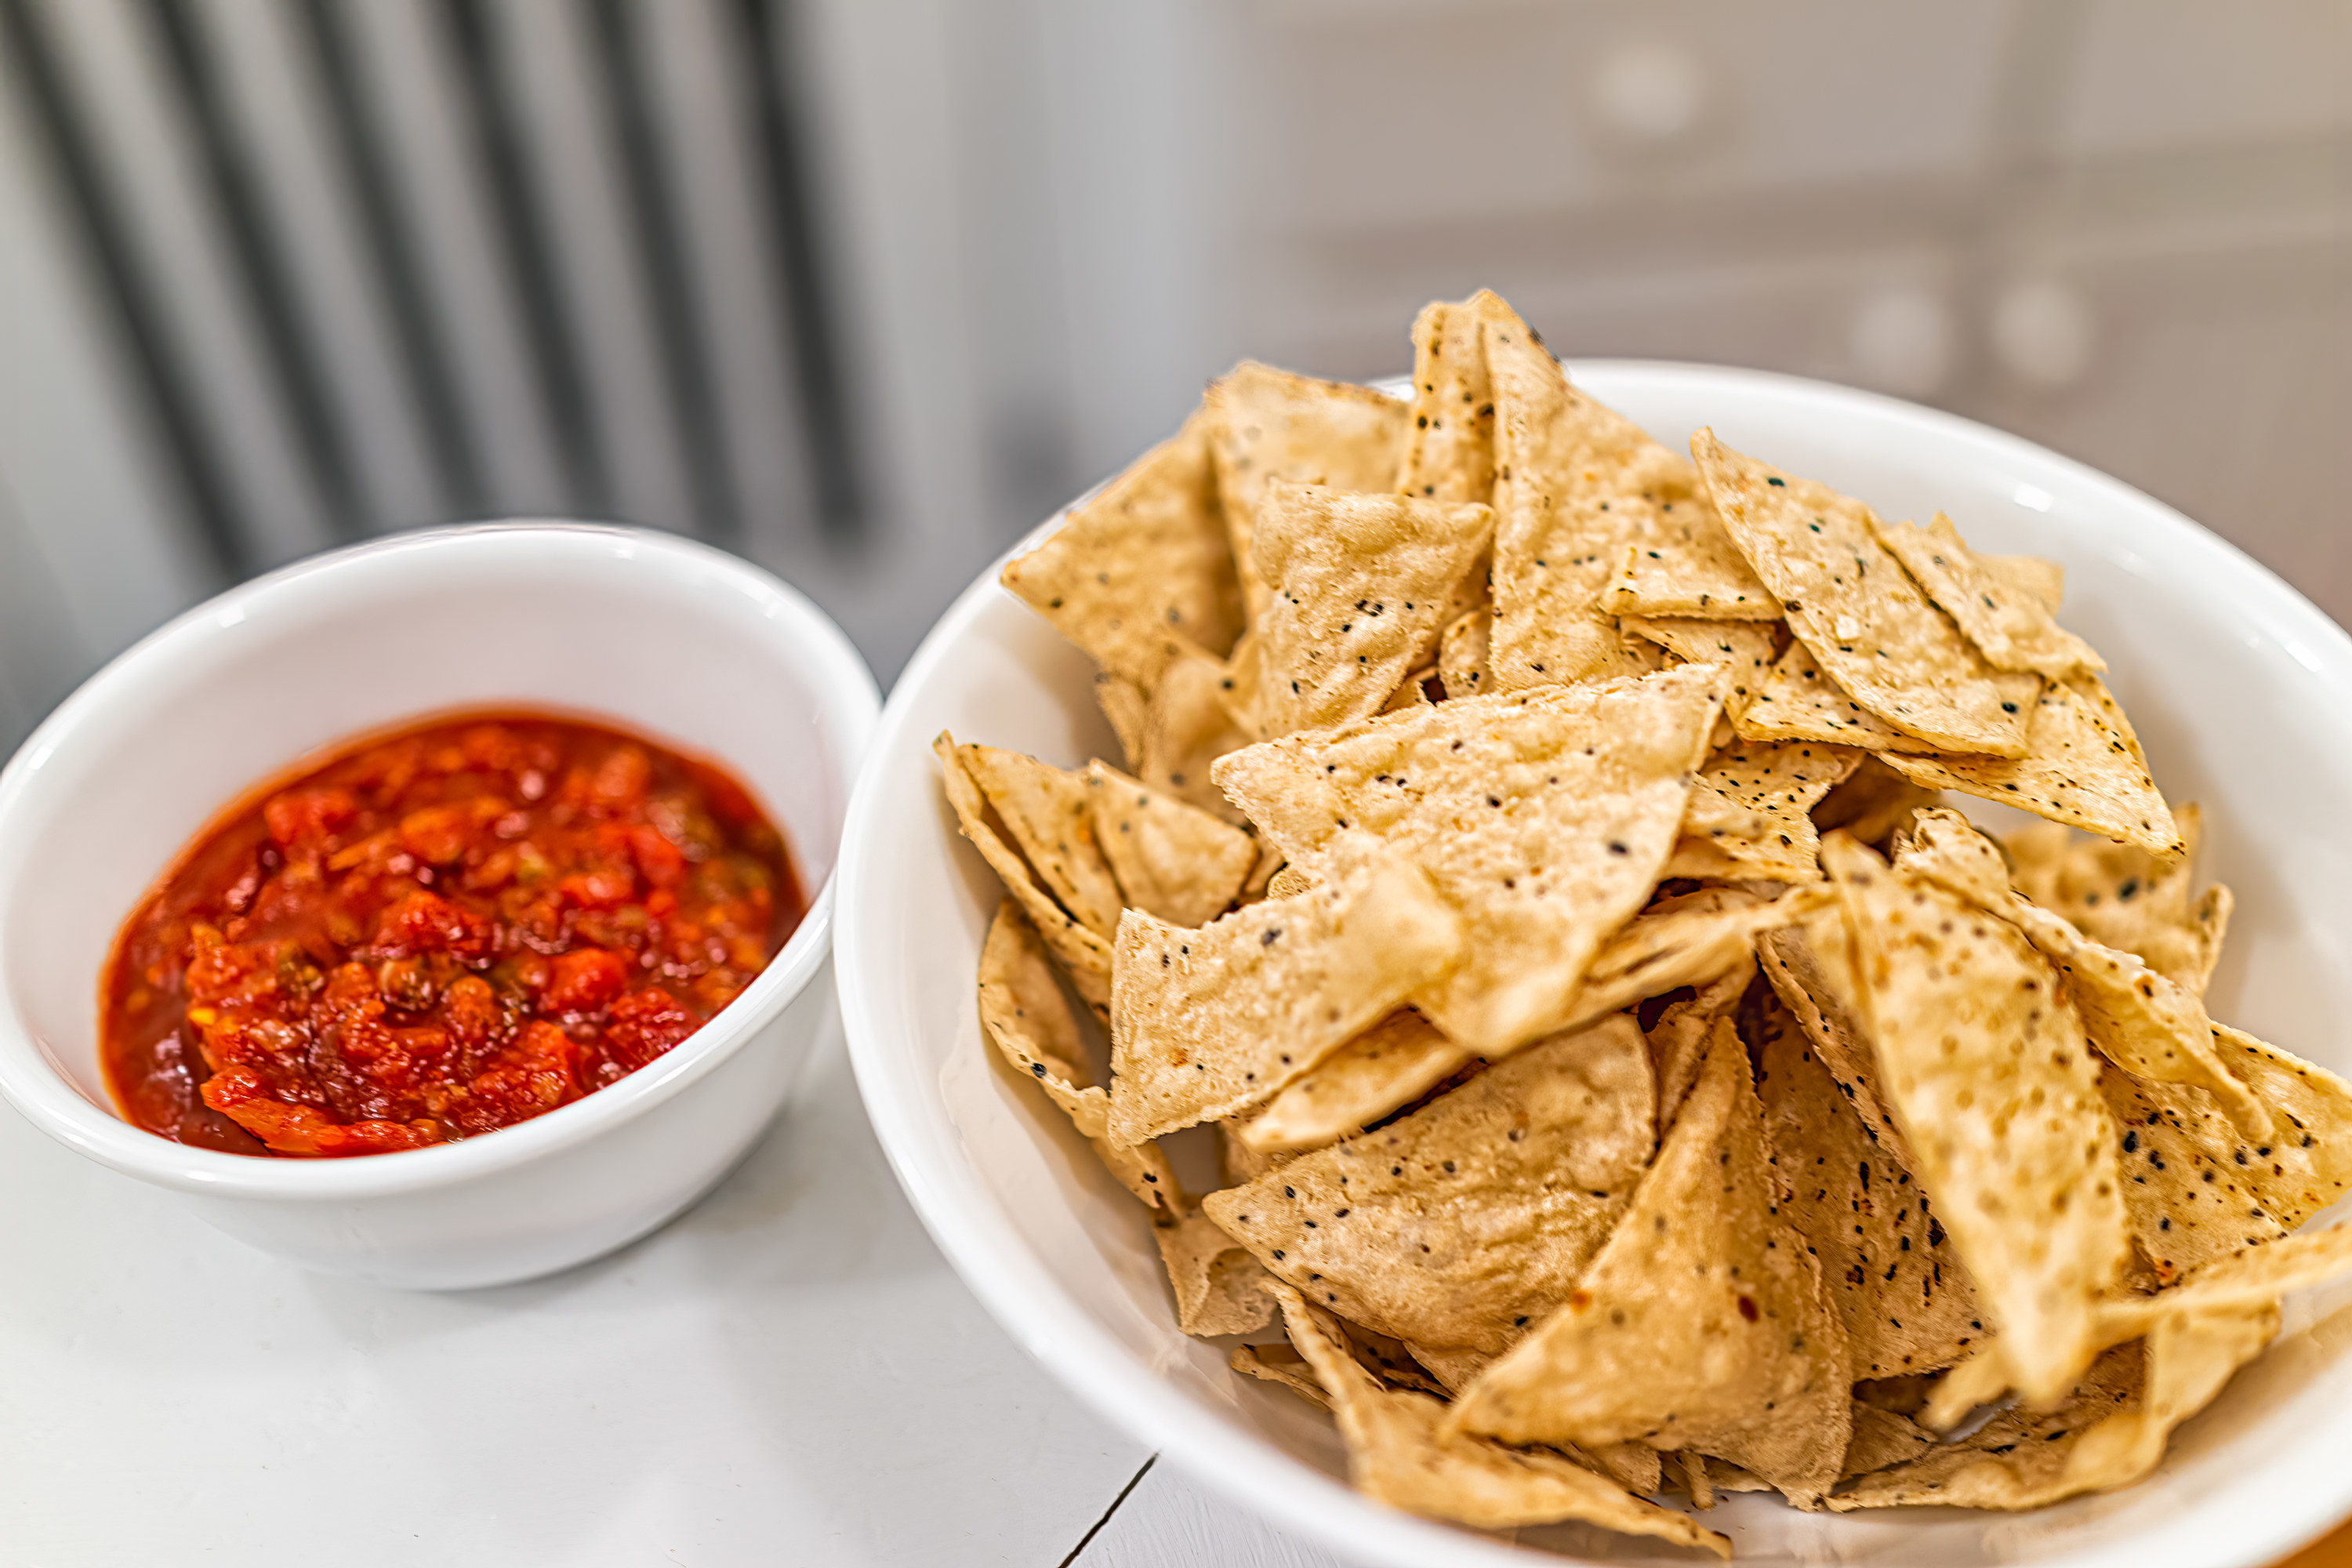 Puréed salsa and tortilla chips